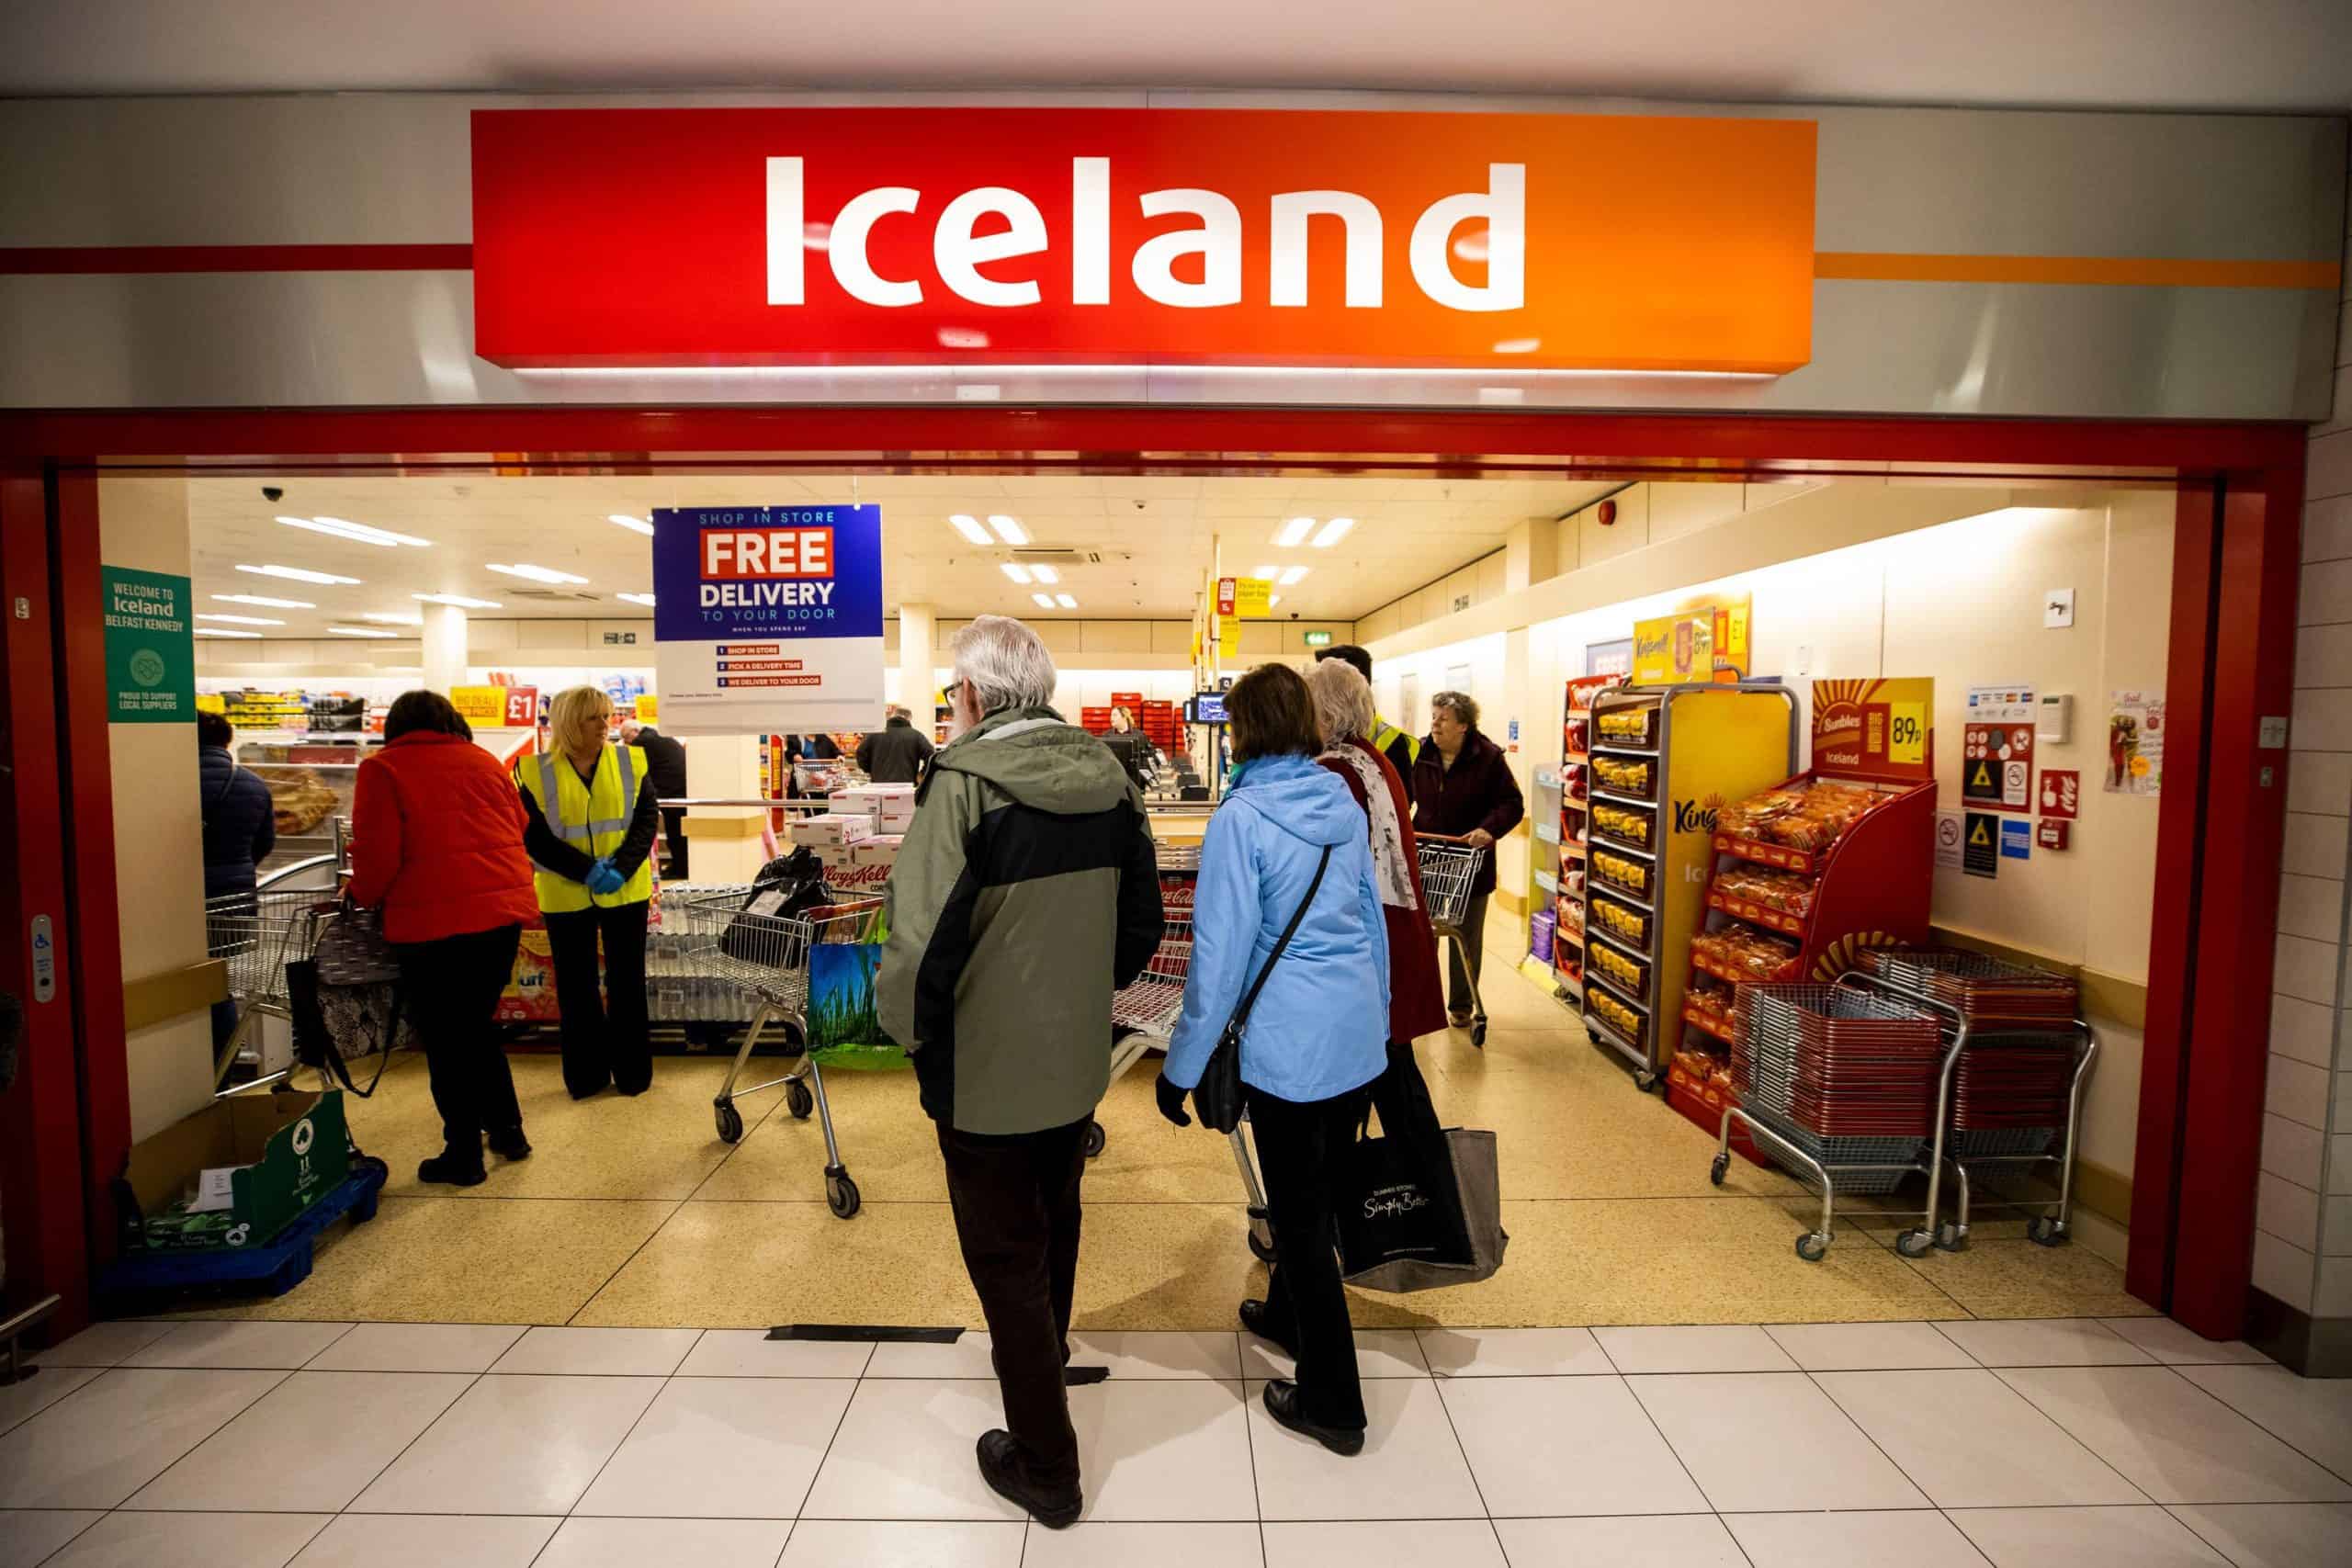 Iceland is giving away free food to cut waste